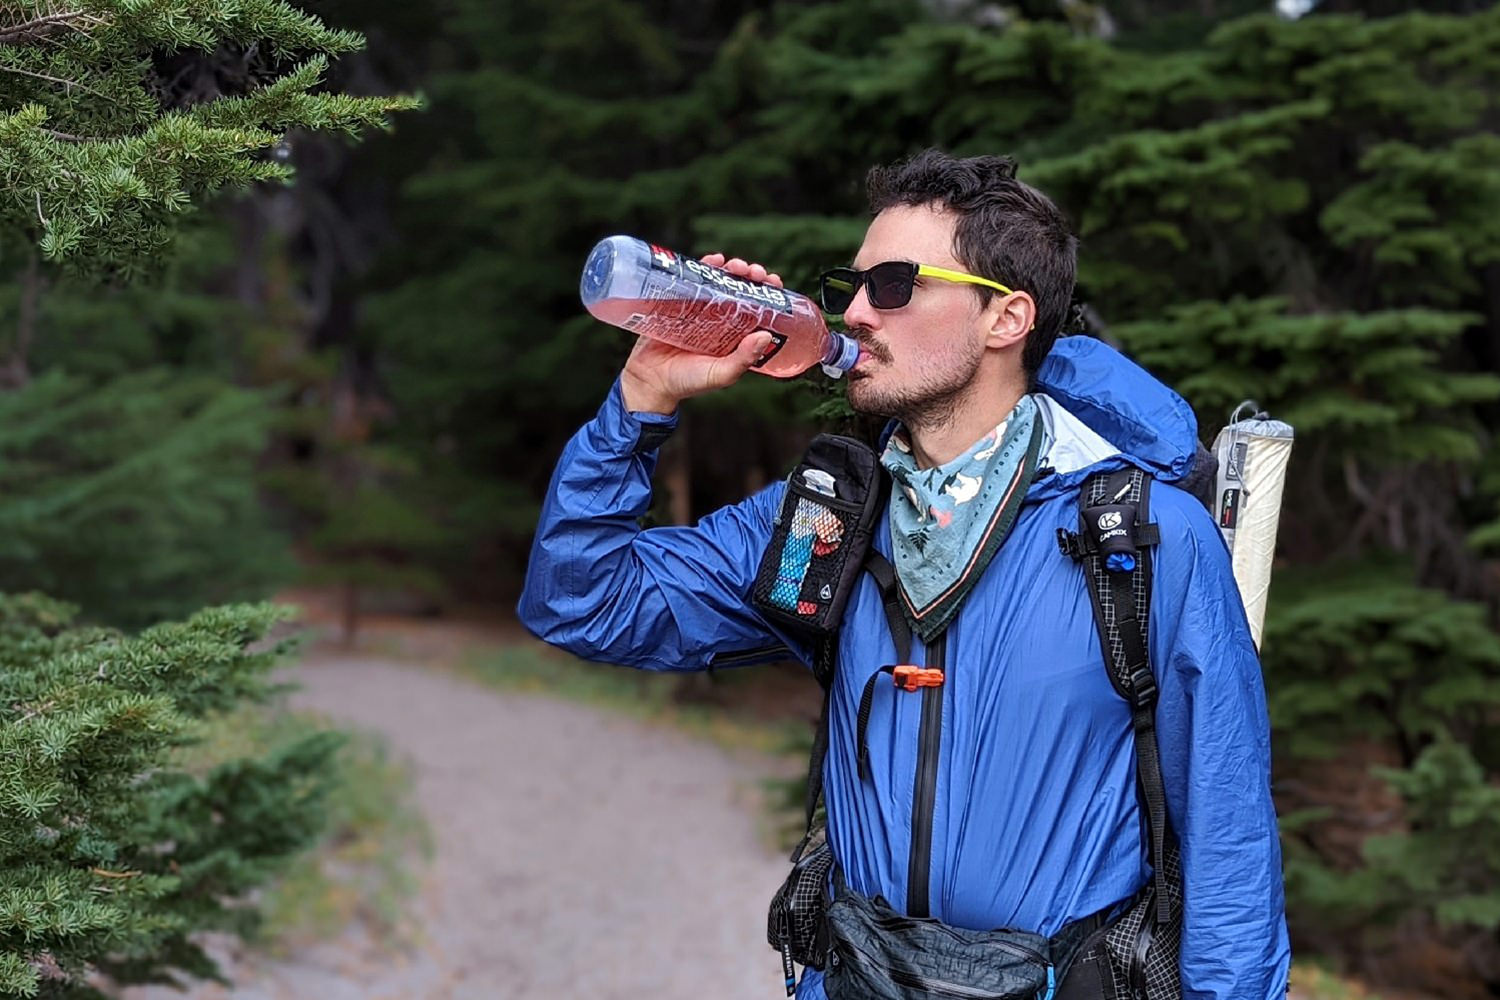 A backpacker drinking from a water bottle filled with pink hydration mix